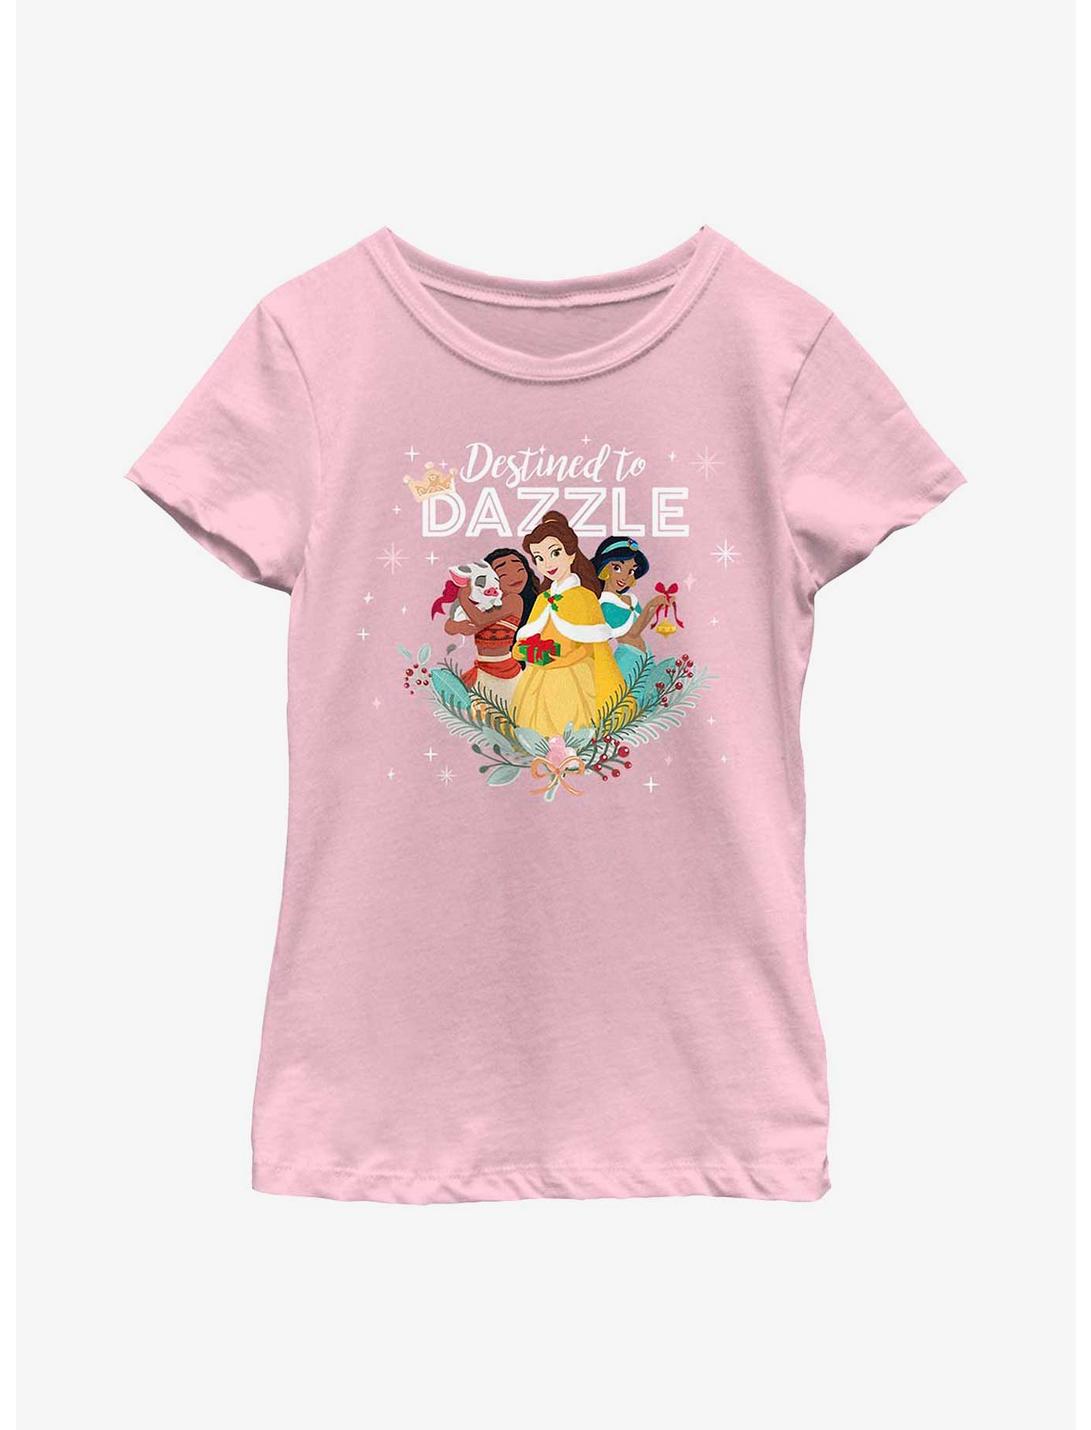 Disney Princesses Destined To Dazzle Youth Girls T-Shirt, PINK, hi-res